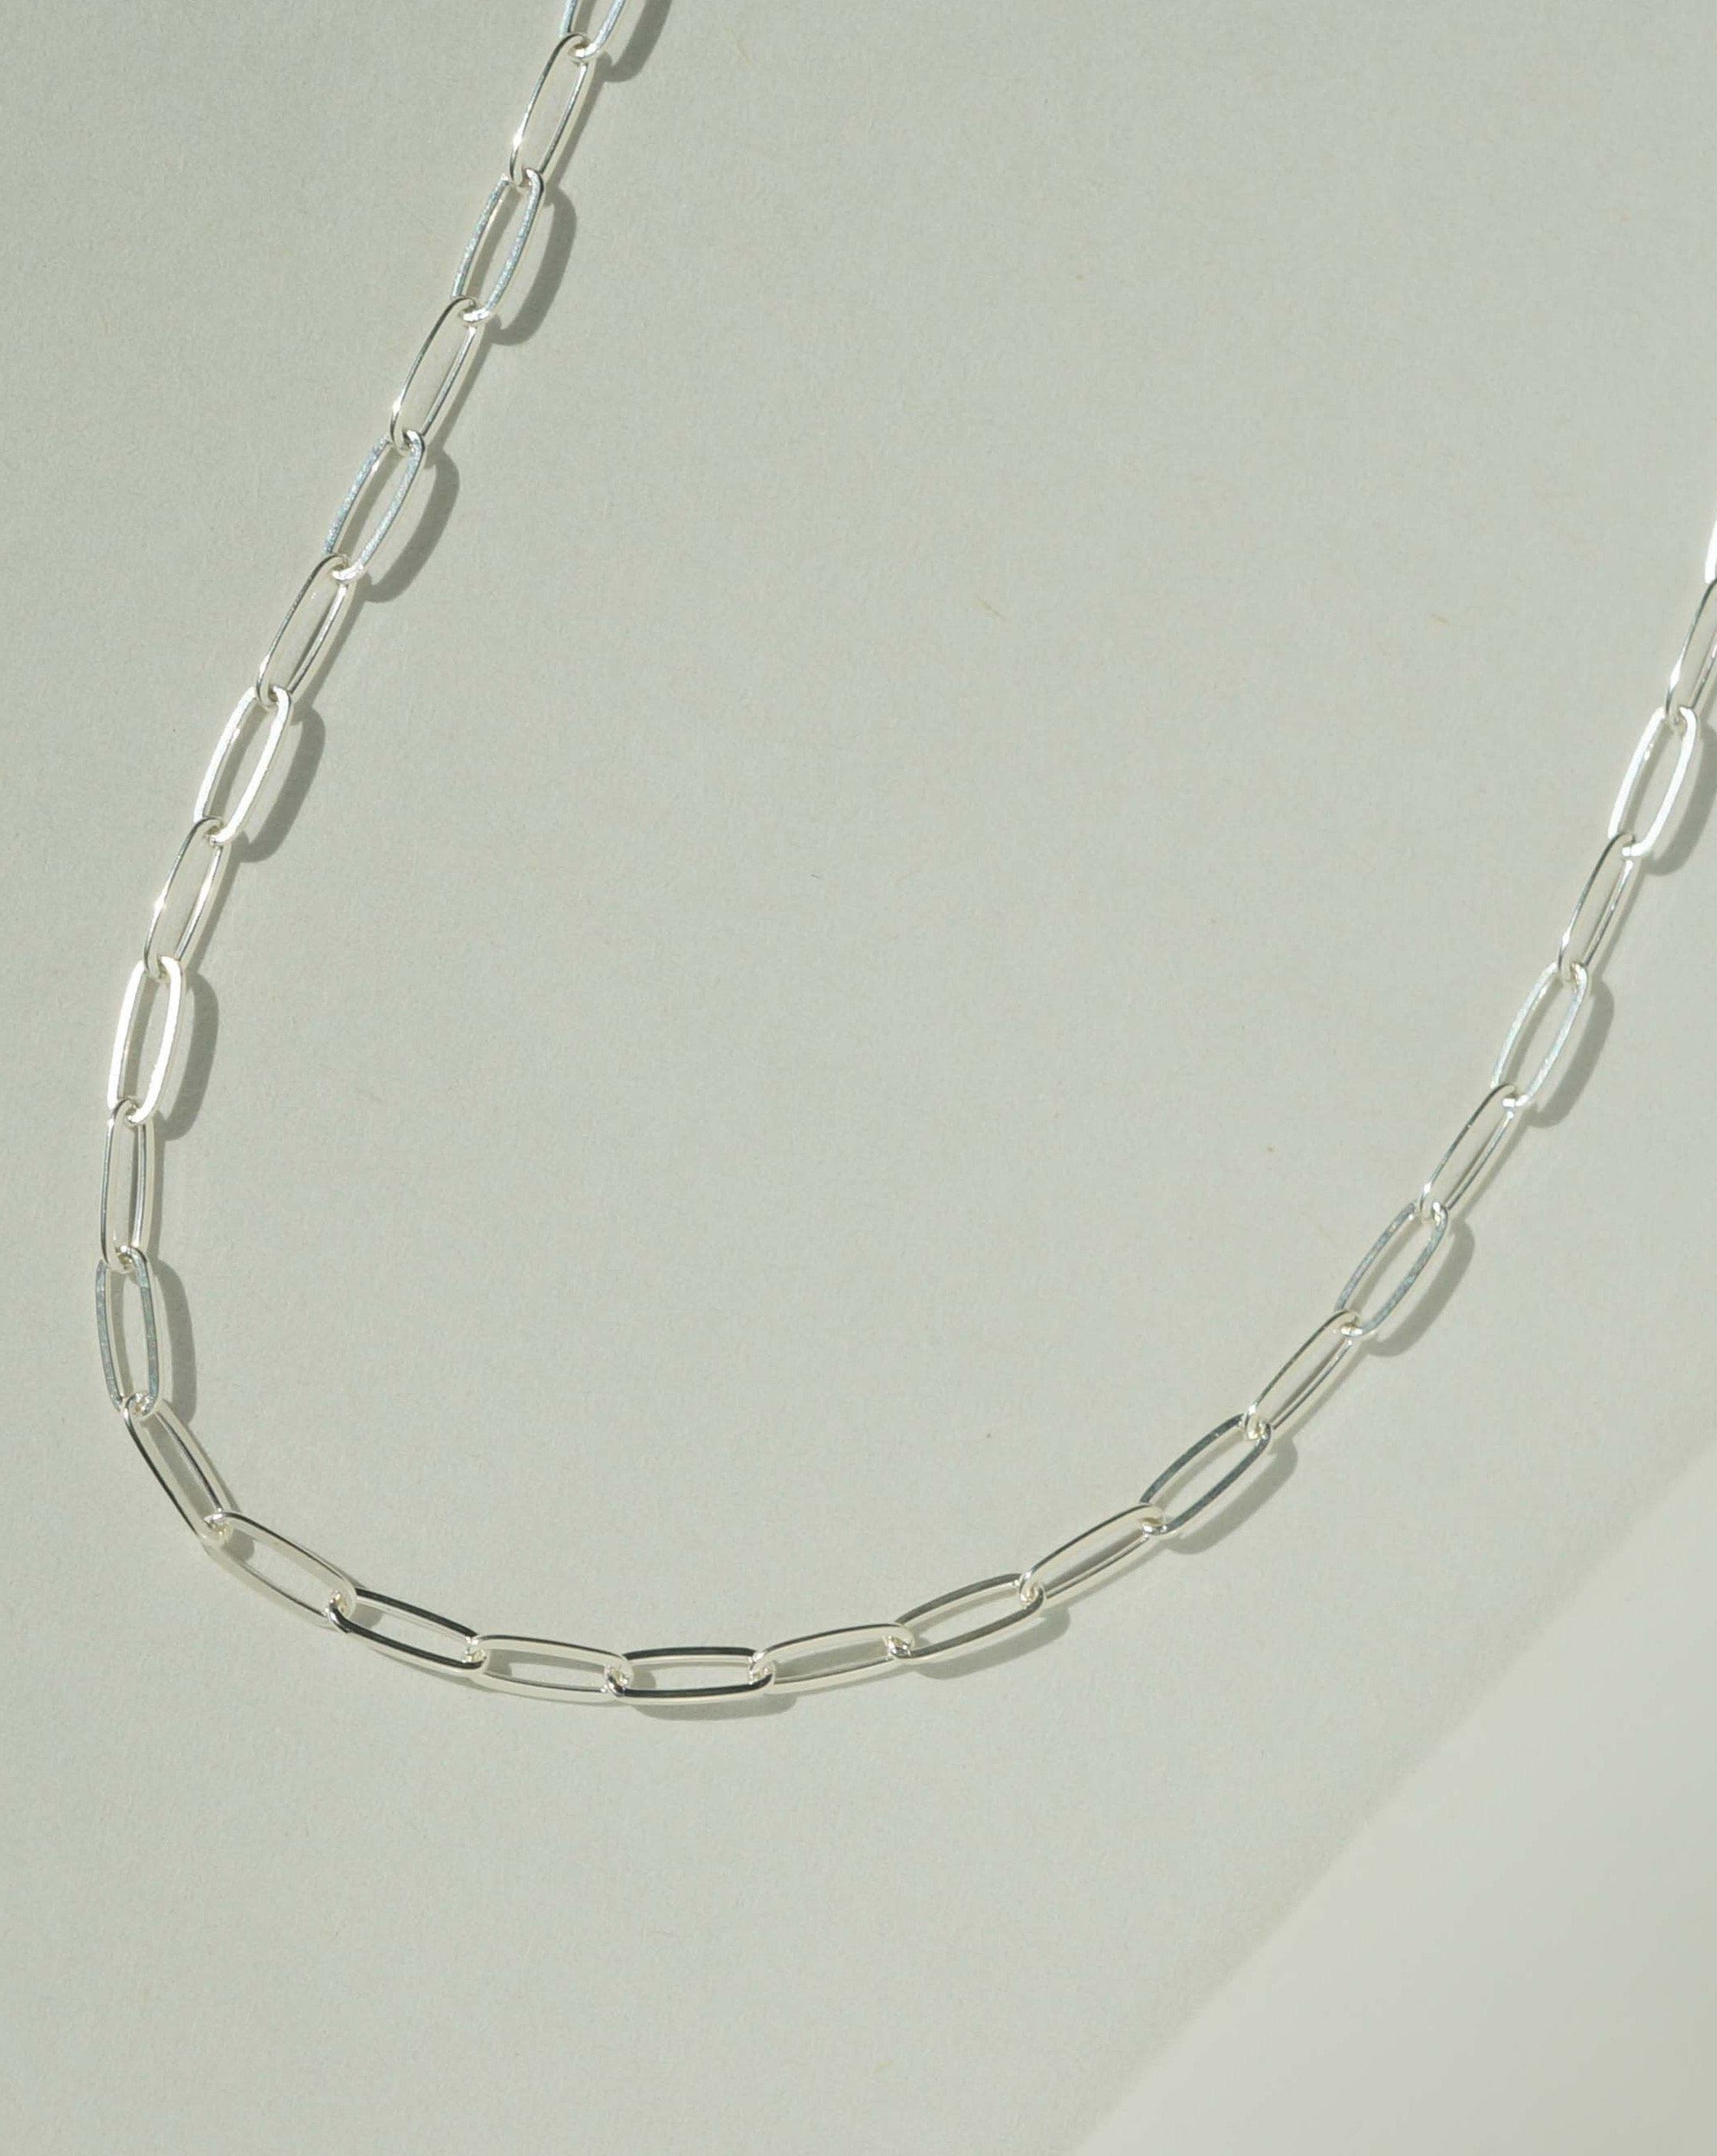 Nora Necklace by KOZAKH. A 14 to 16 inch adjustable length, thin flat link paperclip style chain necklace, crafted in Sterling Silver.